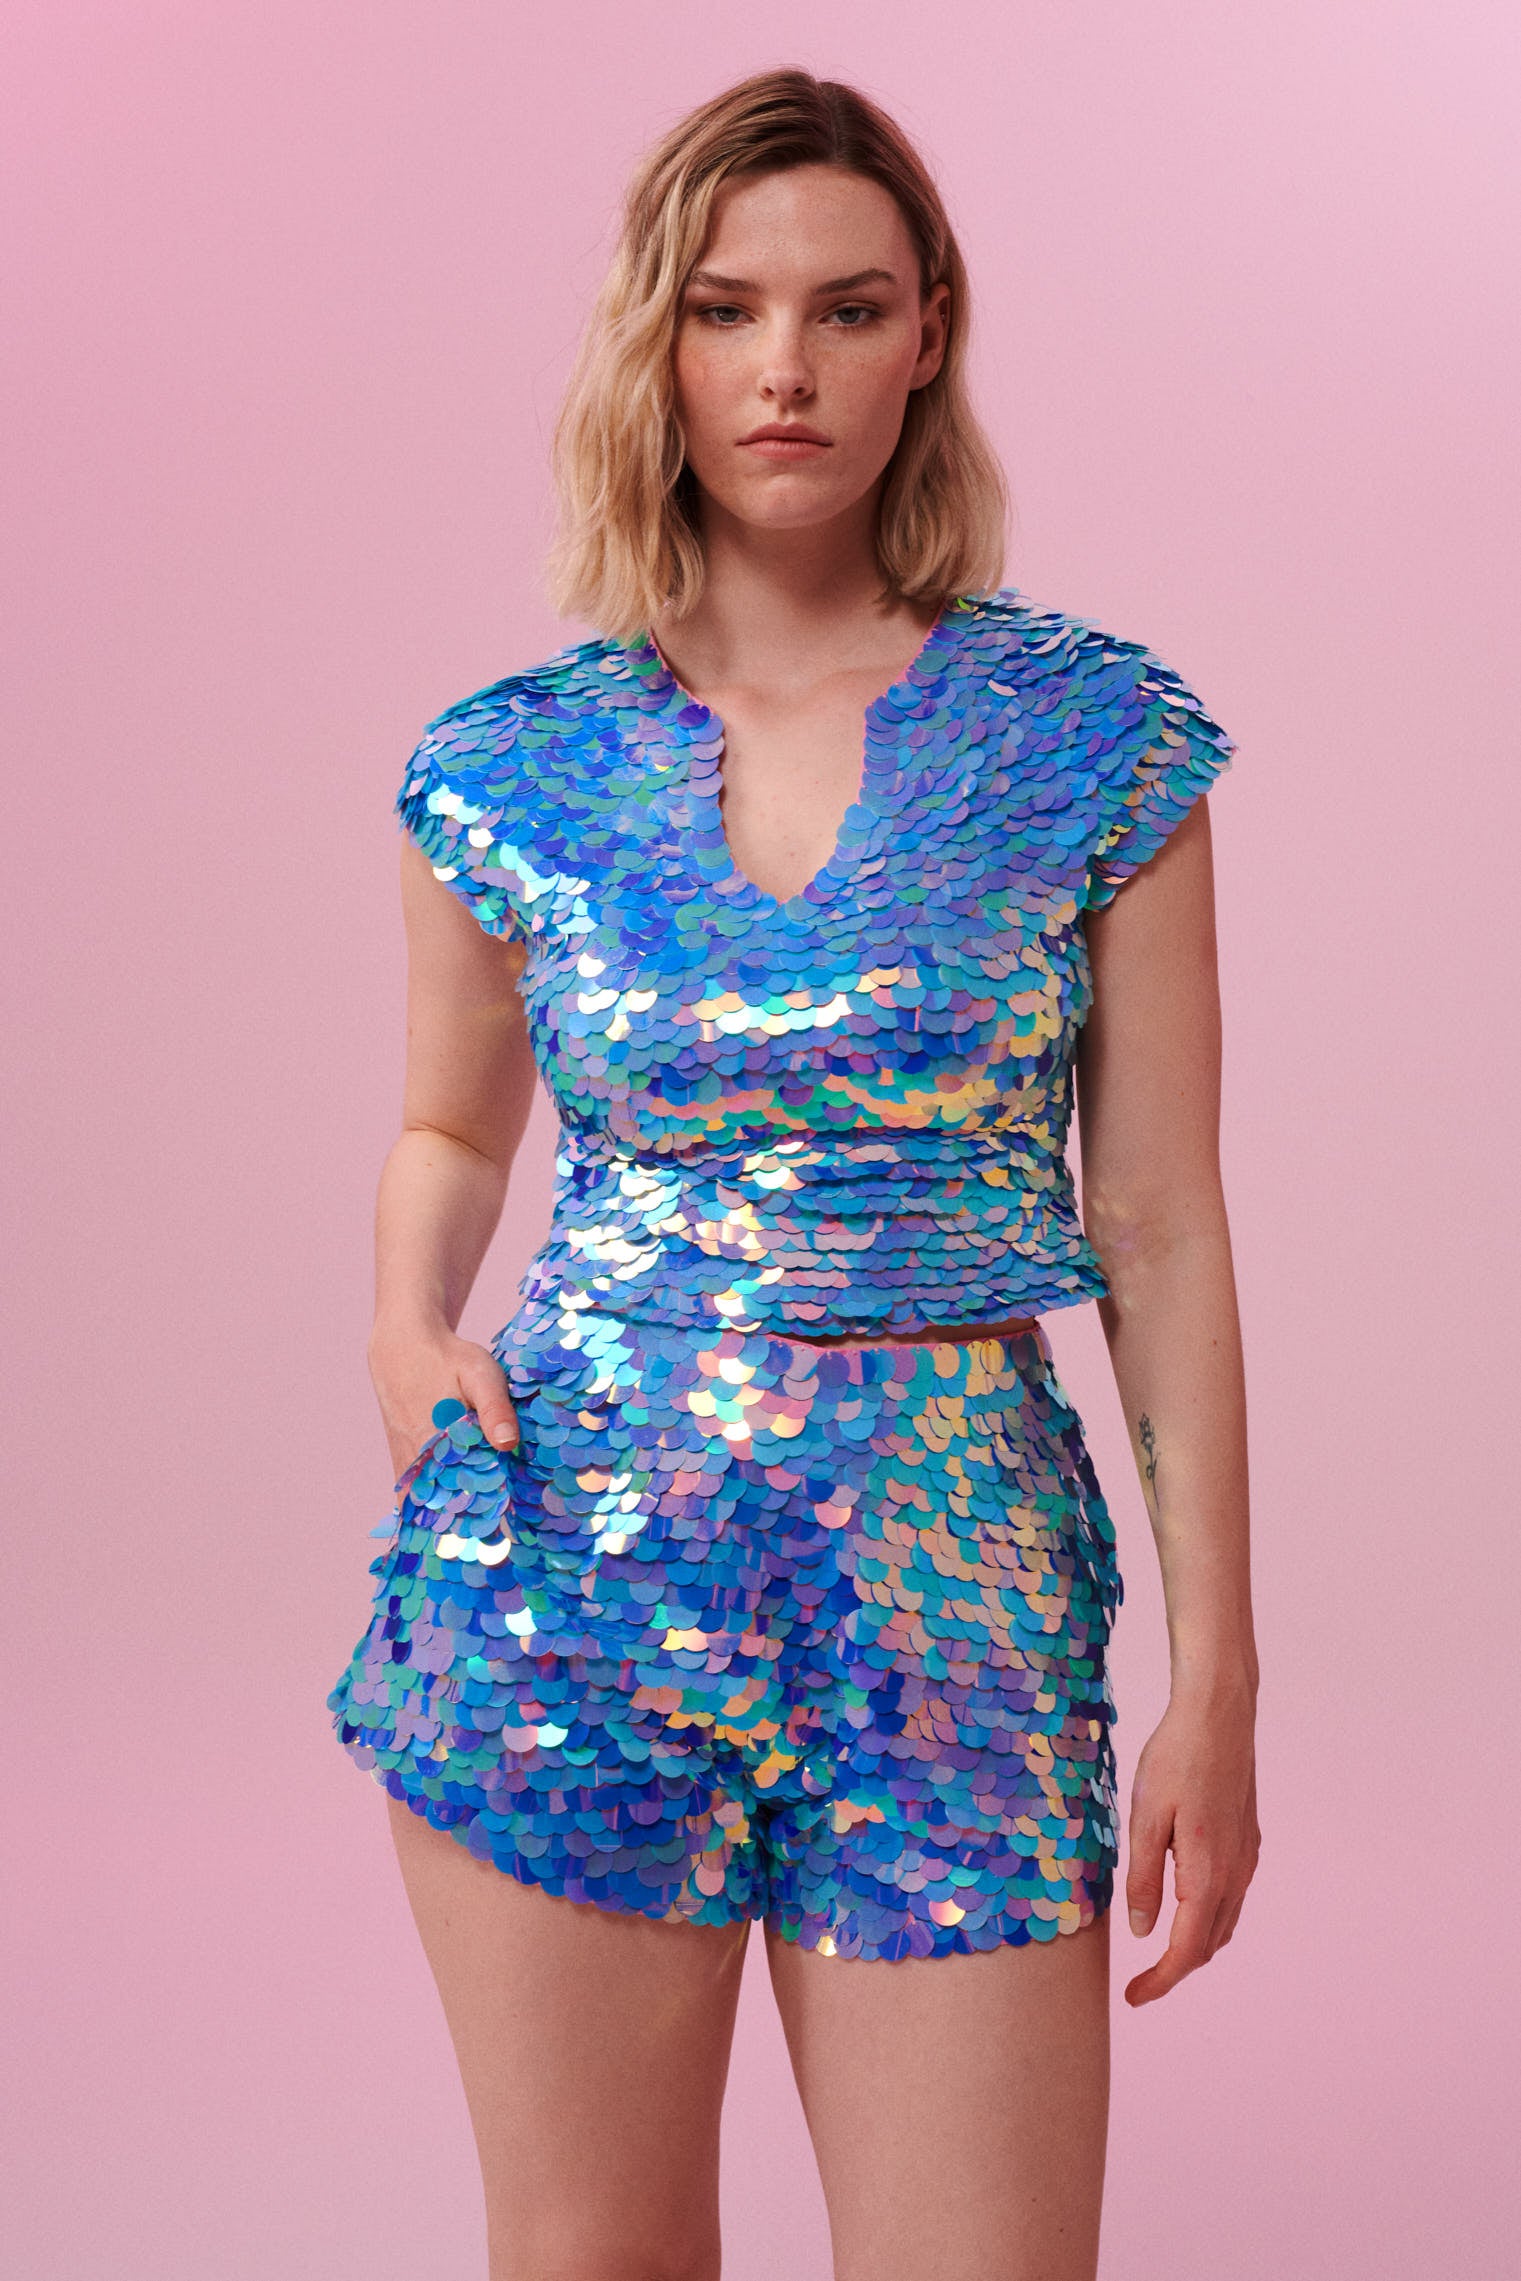 A woman with short blonde hair, wearing high waisted festival sequin shorts and a matching sequin top made with large round holographic Rosa Bloom sequins. The Amethyst  sequins glisten in the light, creating a mix of shimmering colours of lilac purple, light blue and soft pinks. 